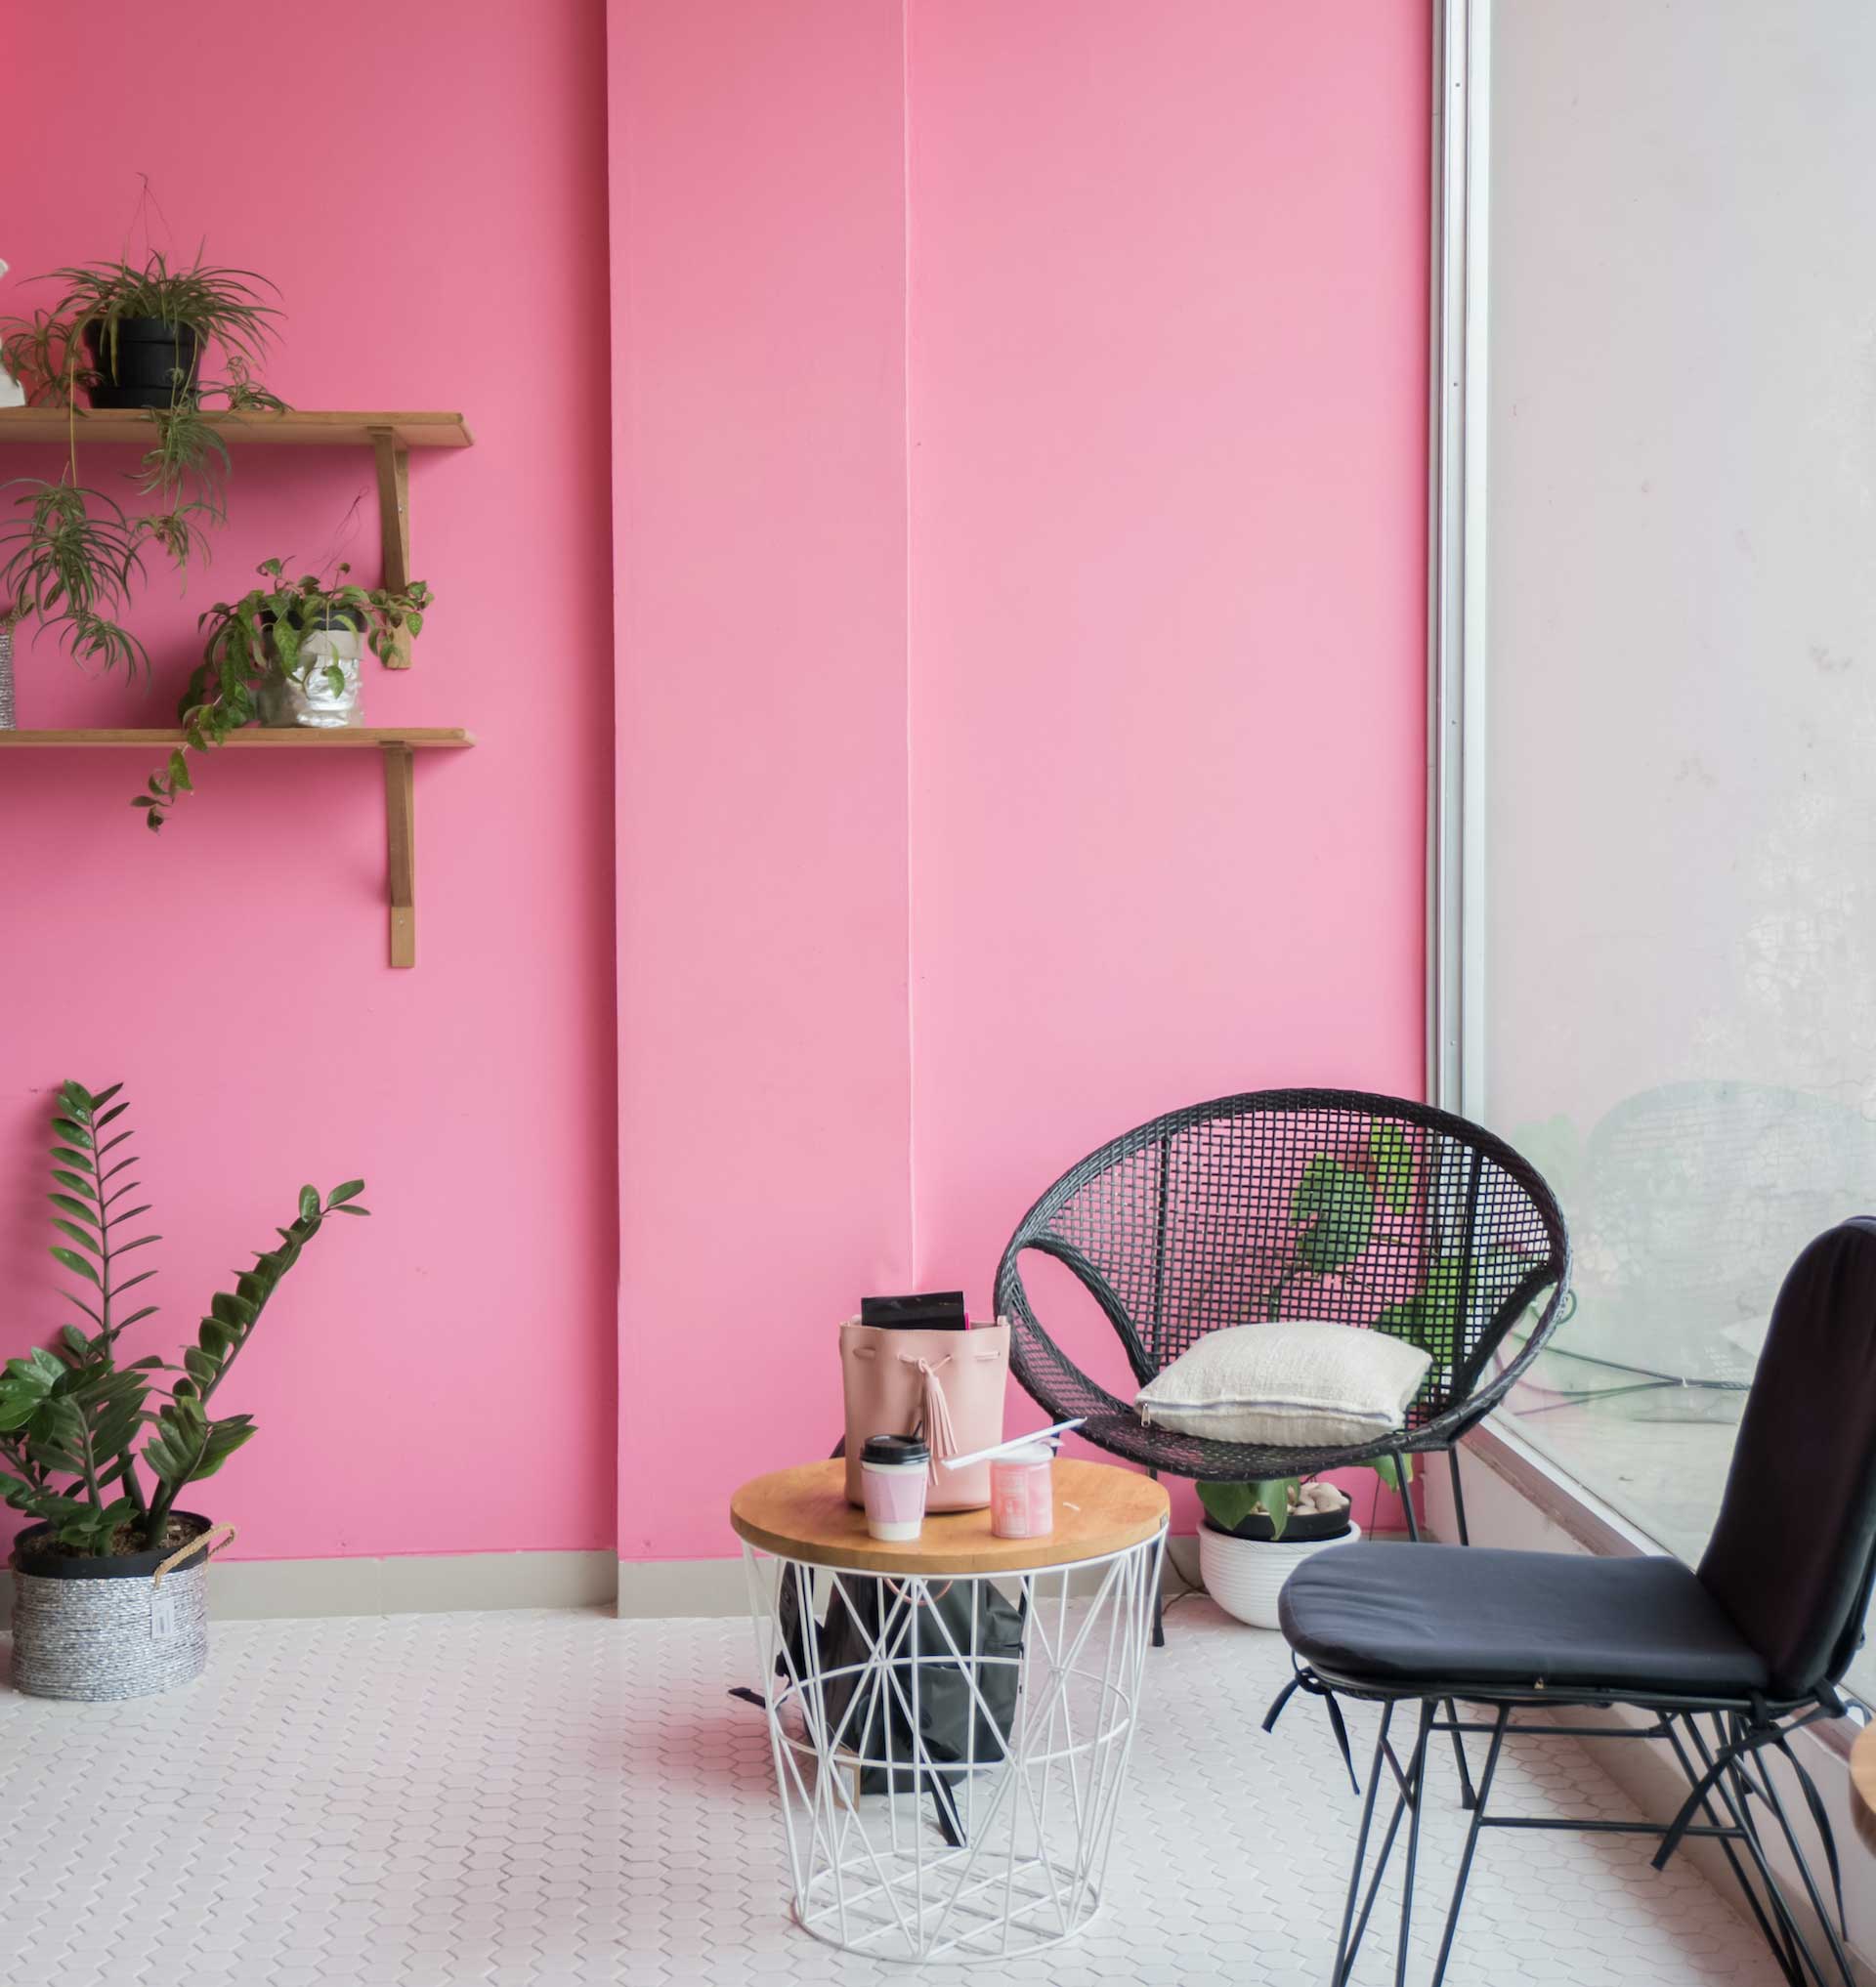 Spacious interior with pink wall, furniture and plants